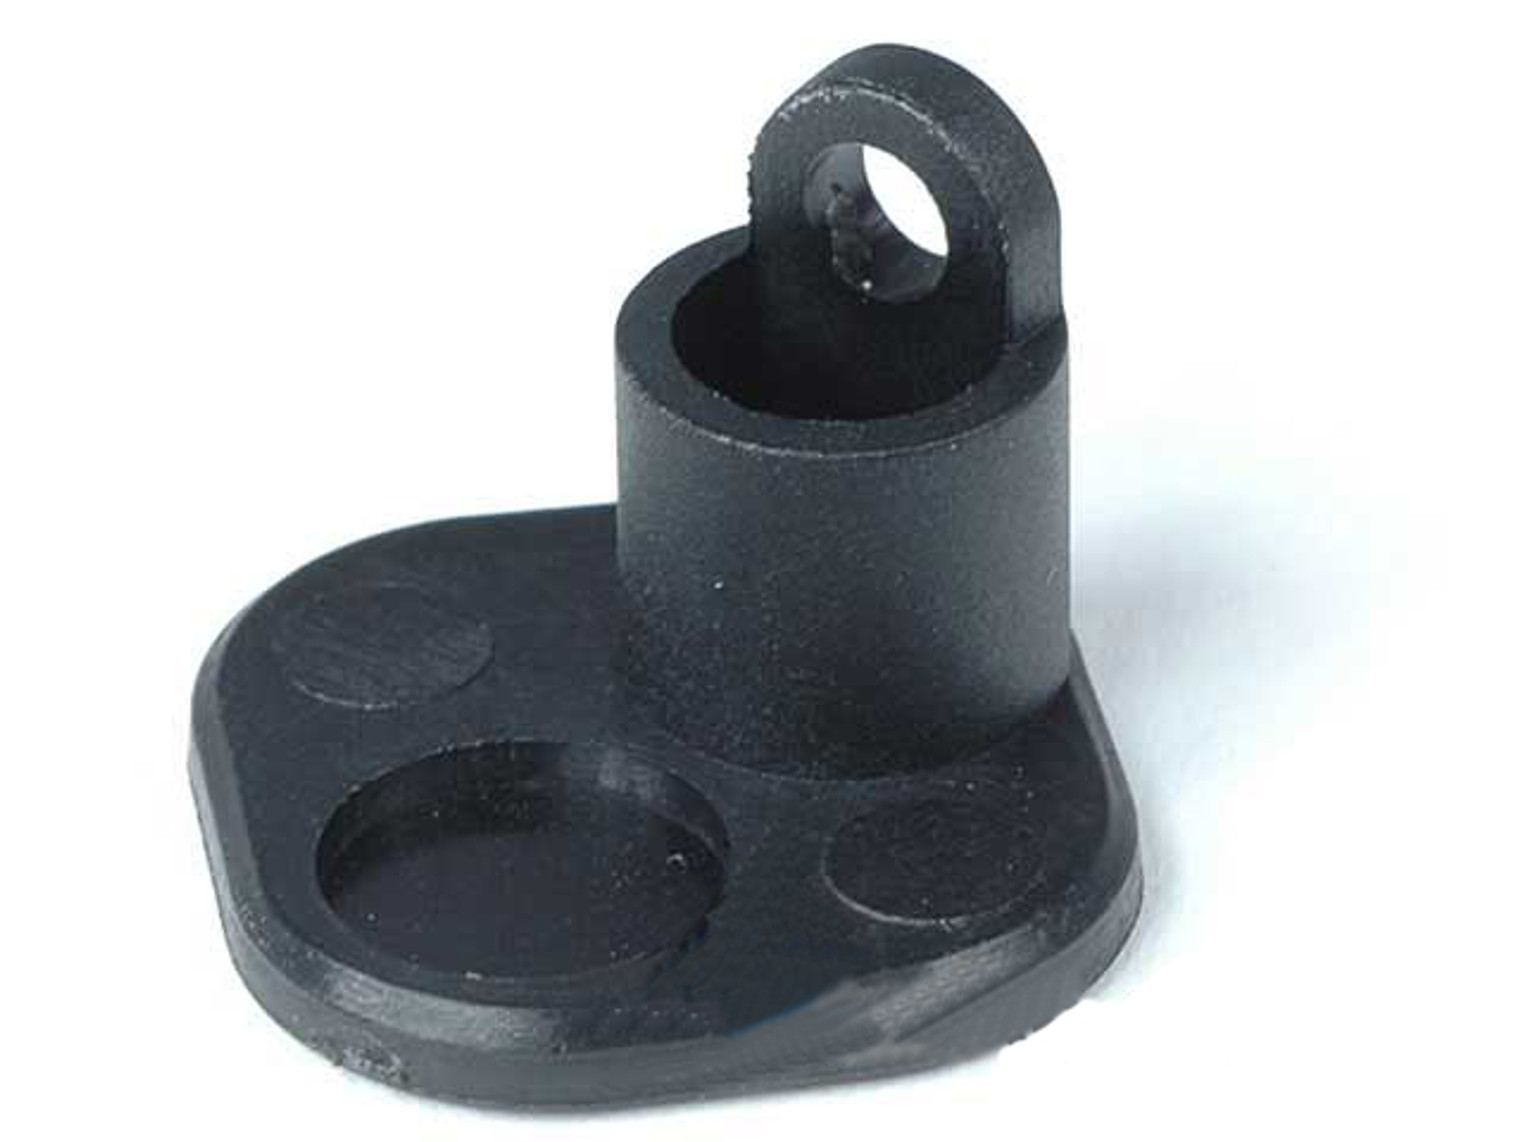 Replacement Stock Cheekpad Adjustment Button for WE Scar Series Airsoft Gas Blowback Rifles